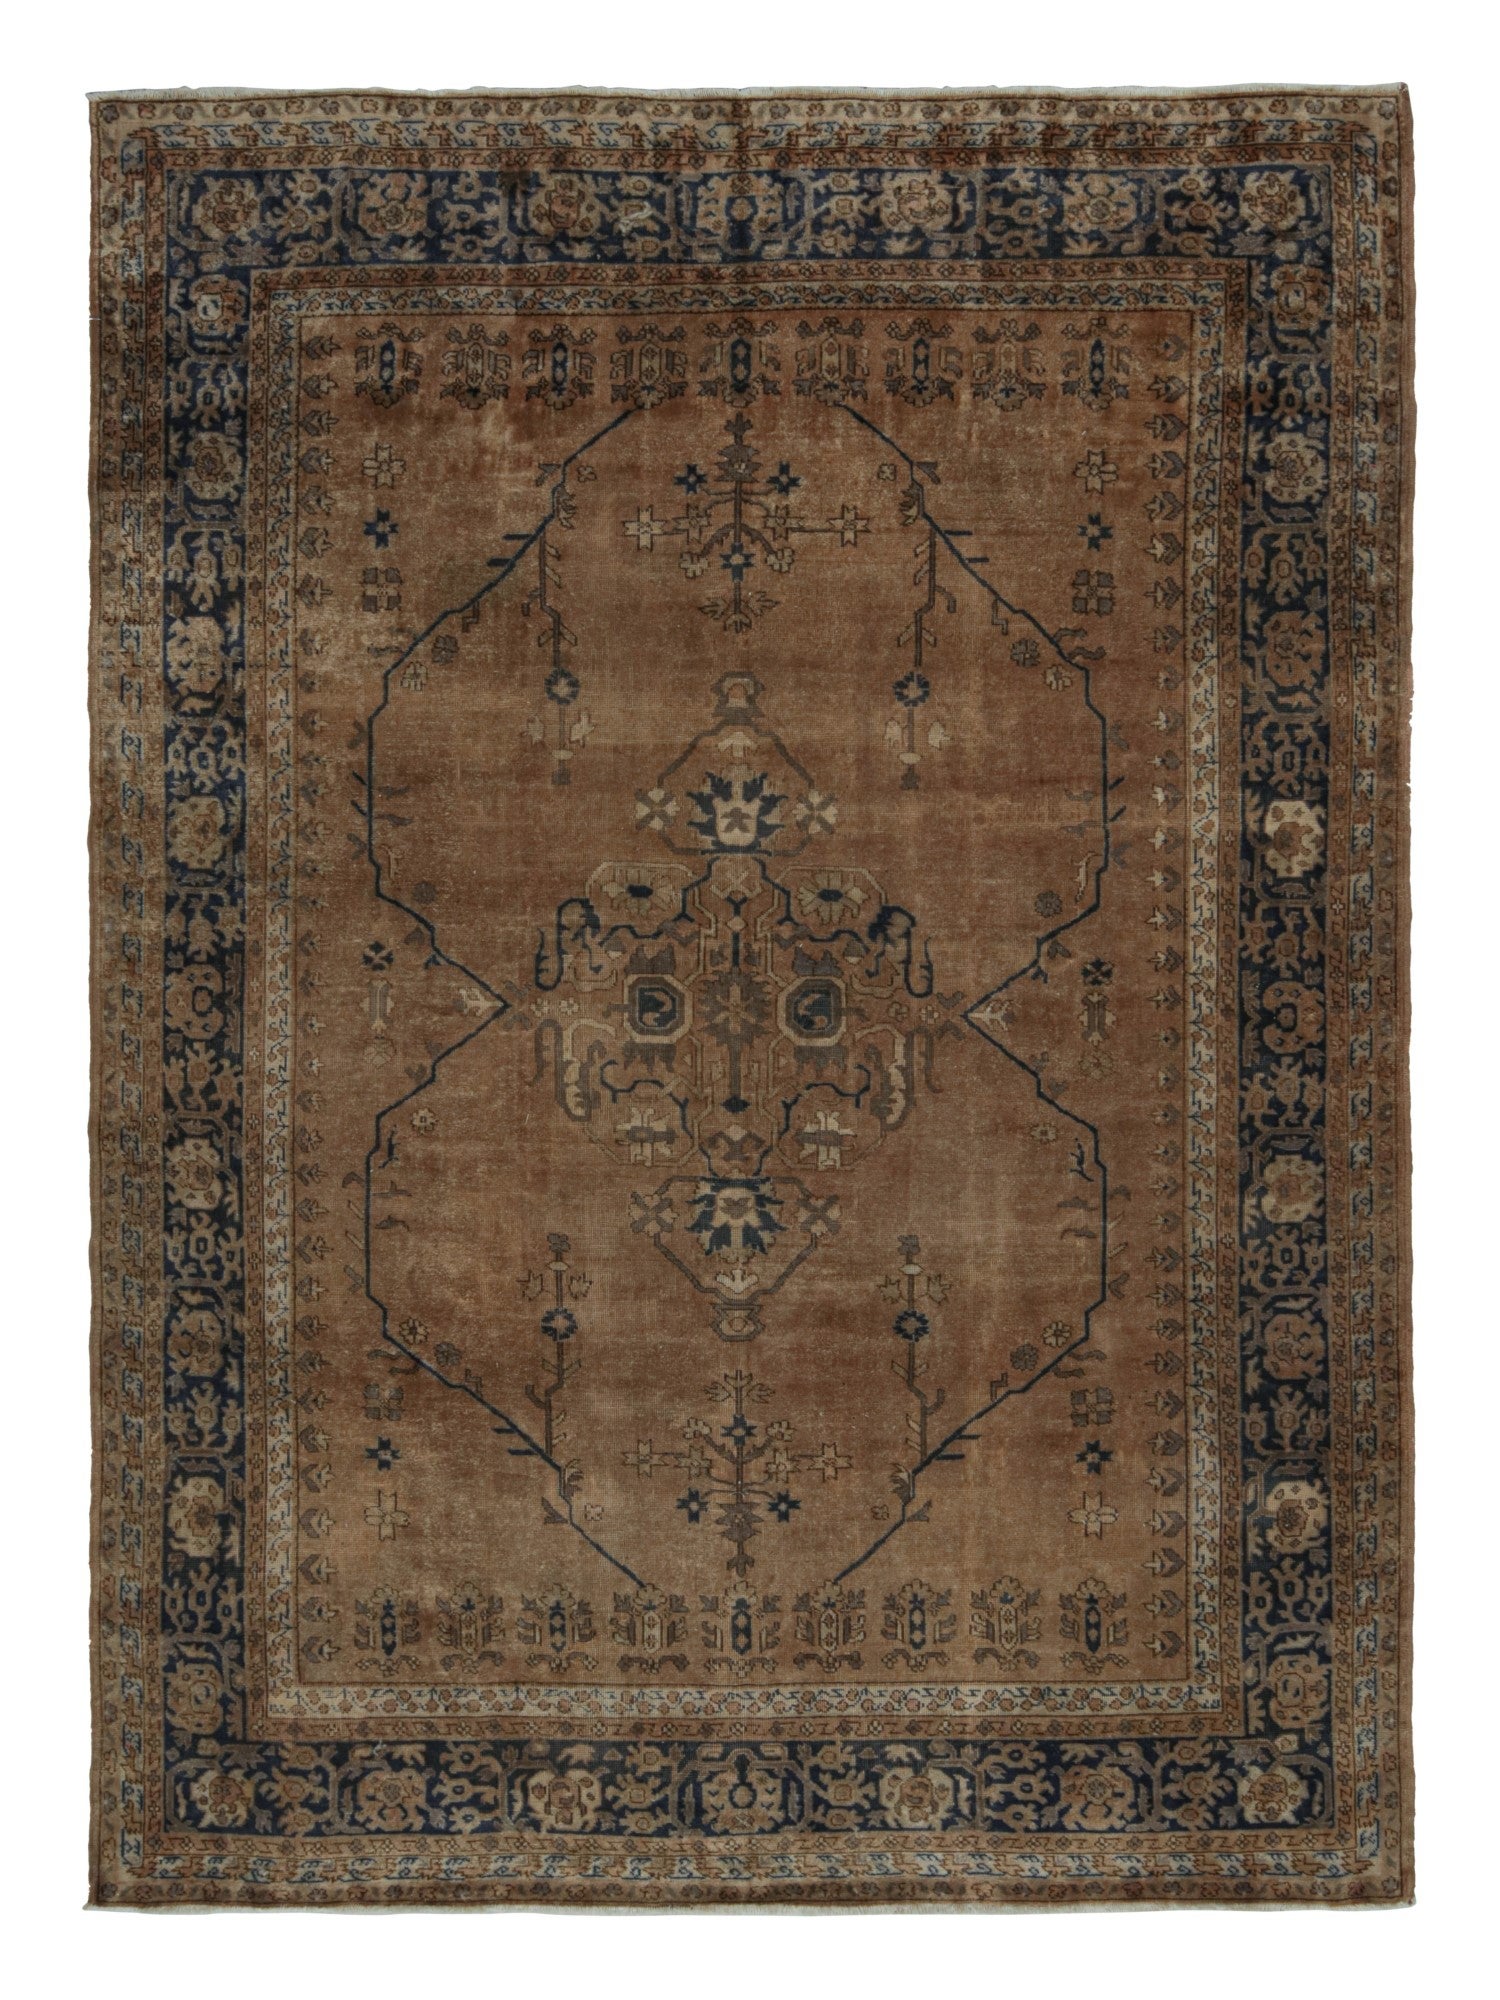 Antique Turkish Isparta Rug, with Geometric Floral Patterns, from Rug & Kilim For Sale